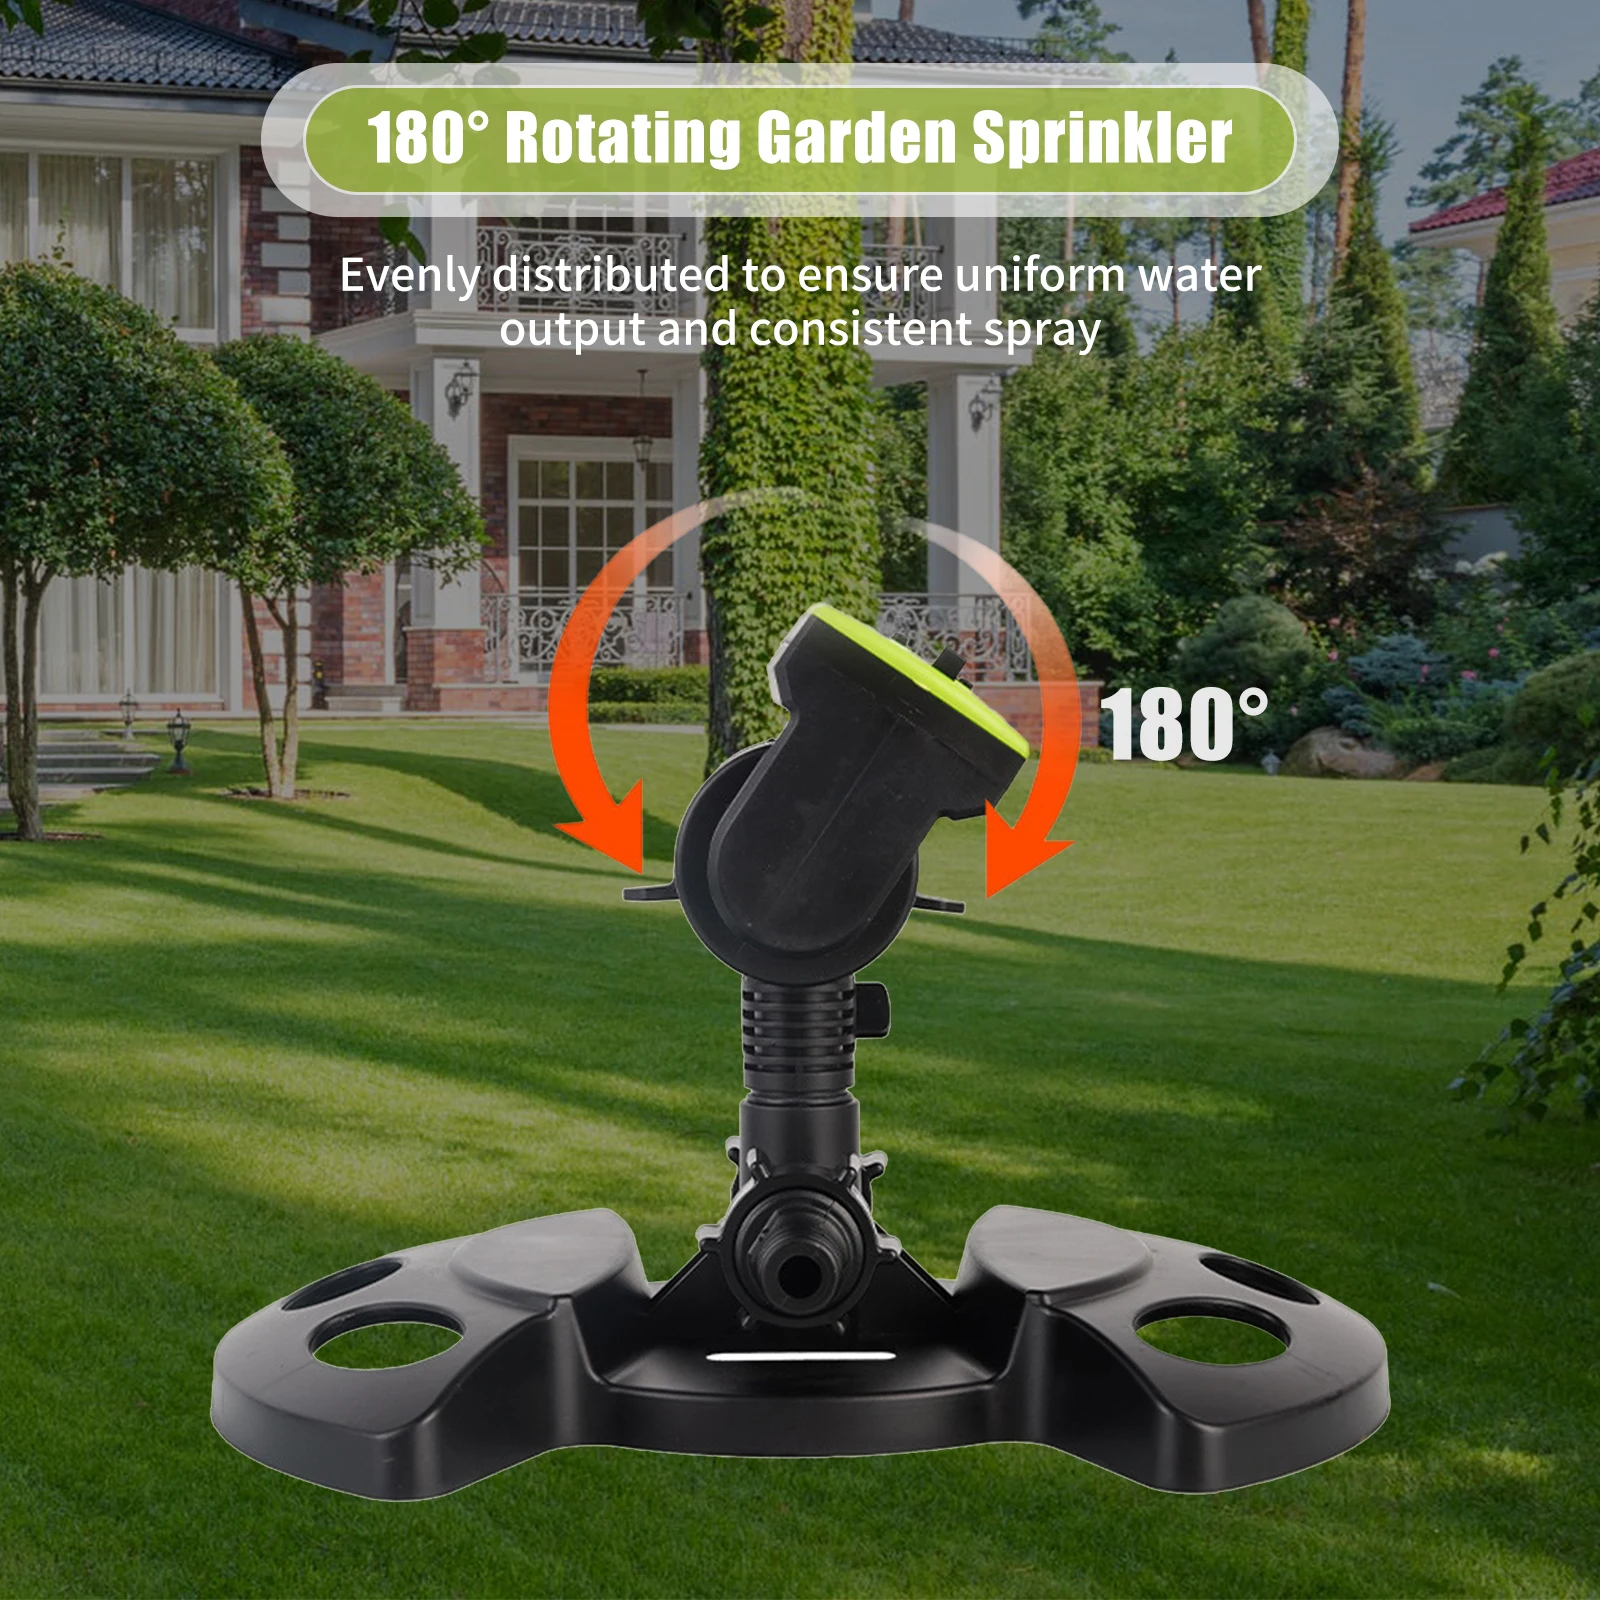 16 Holes Garden Sprinkler 180° Rotating Automatic Watering Irrigation System Outdoor Garden Lawn Patio Courtyard Water Sprayer images - 6